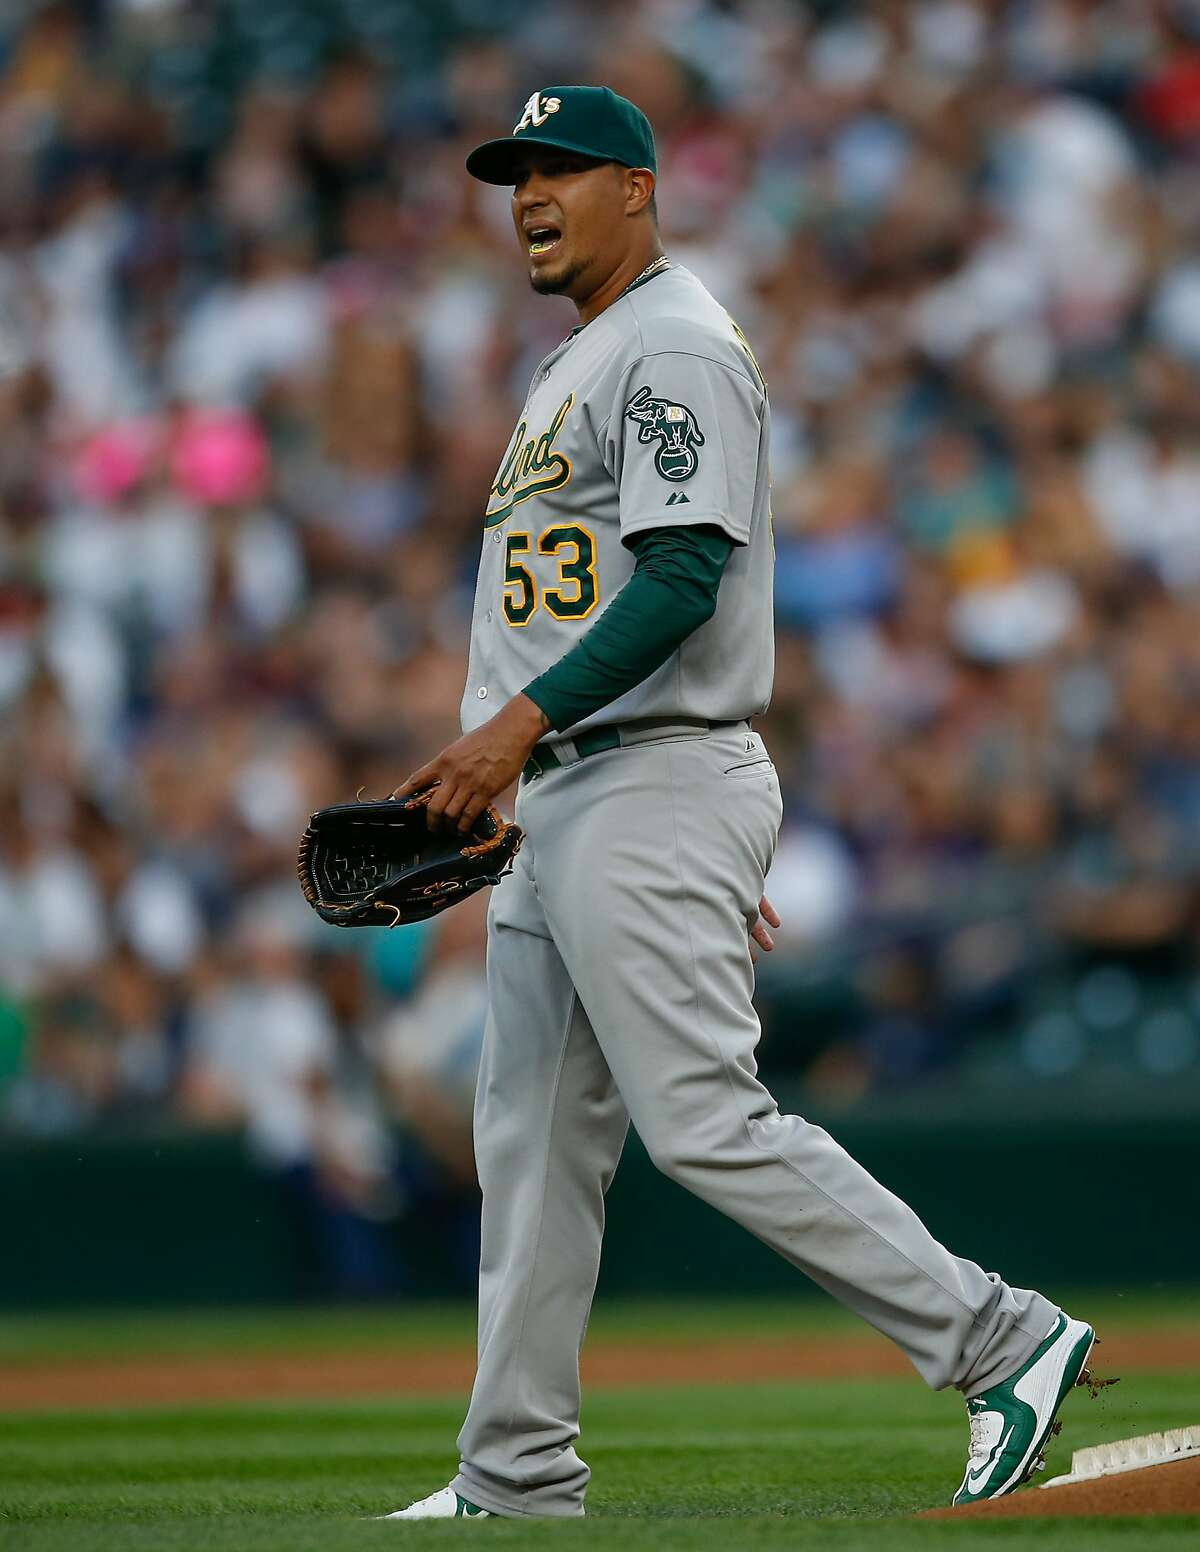 SEATTLE, WA - AUGUST 24: Starting pitcher Felix Doubront #53 of the Oakland Athletics walks off the mound after taking a batted ball off of his ankle in the first inning against the Seattle Mariners at Safeco Field on August 24, 2015 in Seattle, Washington. (Photo by Otto Greule Jr/Getty Images)